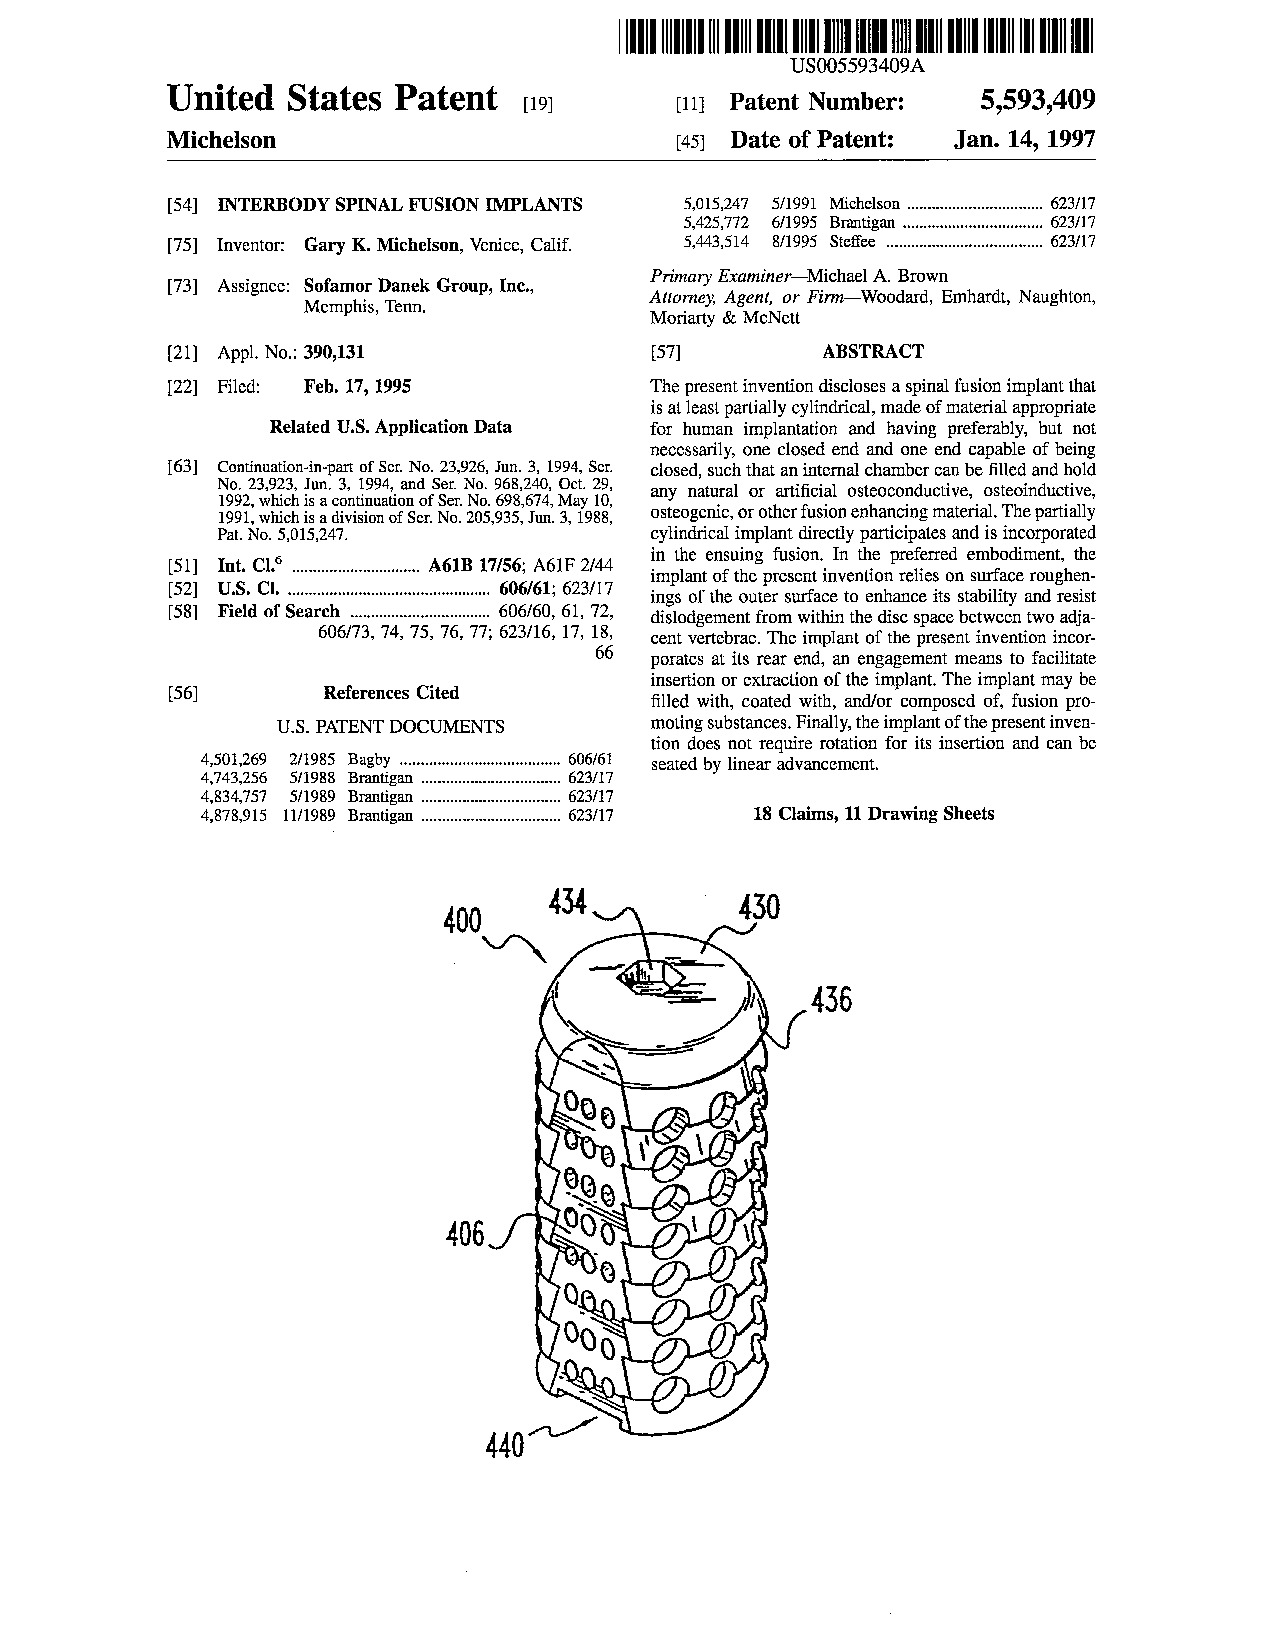 Interbody spinal fusion implants - Patent 5,593,409